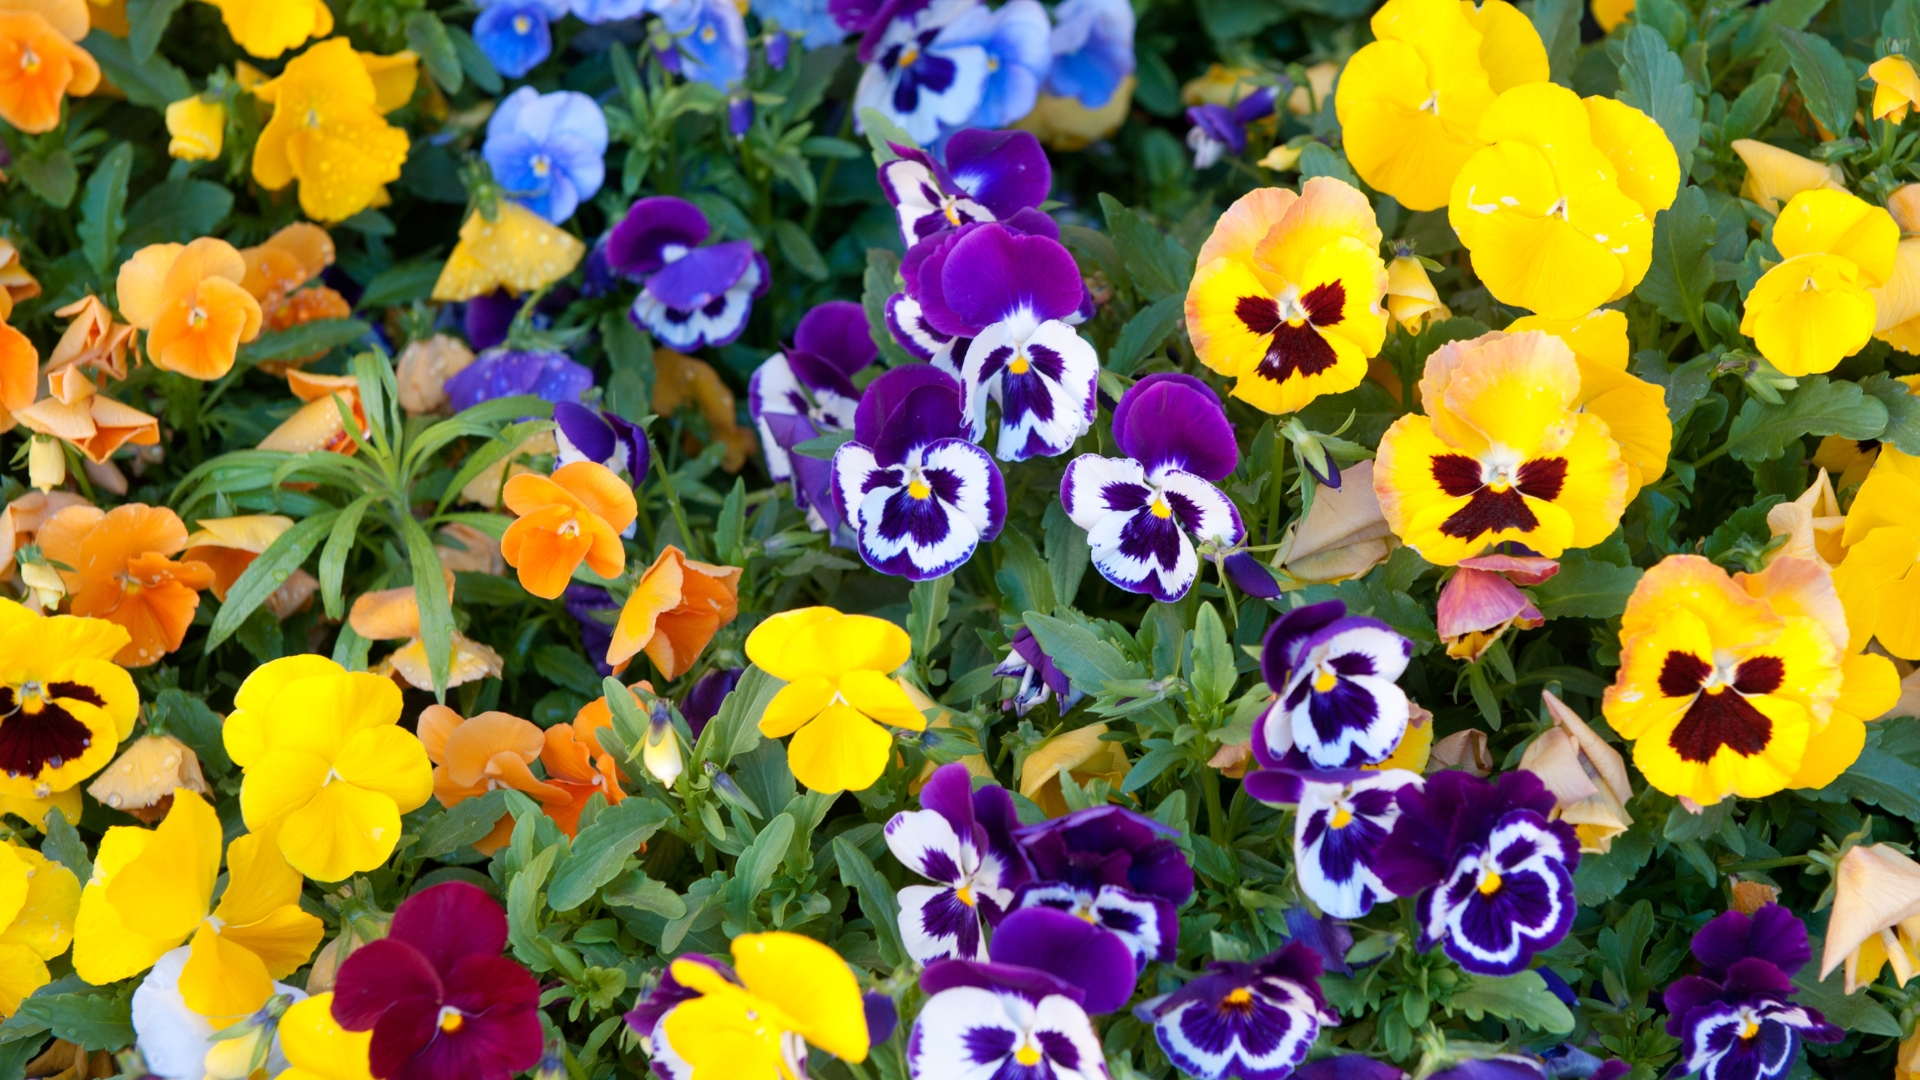 Are Pansies Perennials That Will Return After Winter?